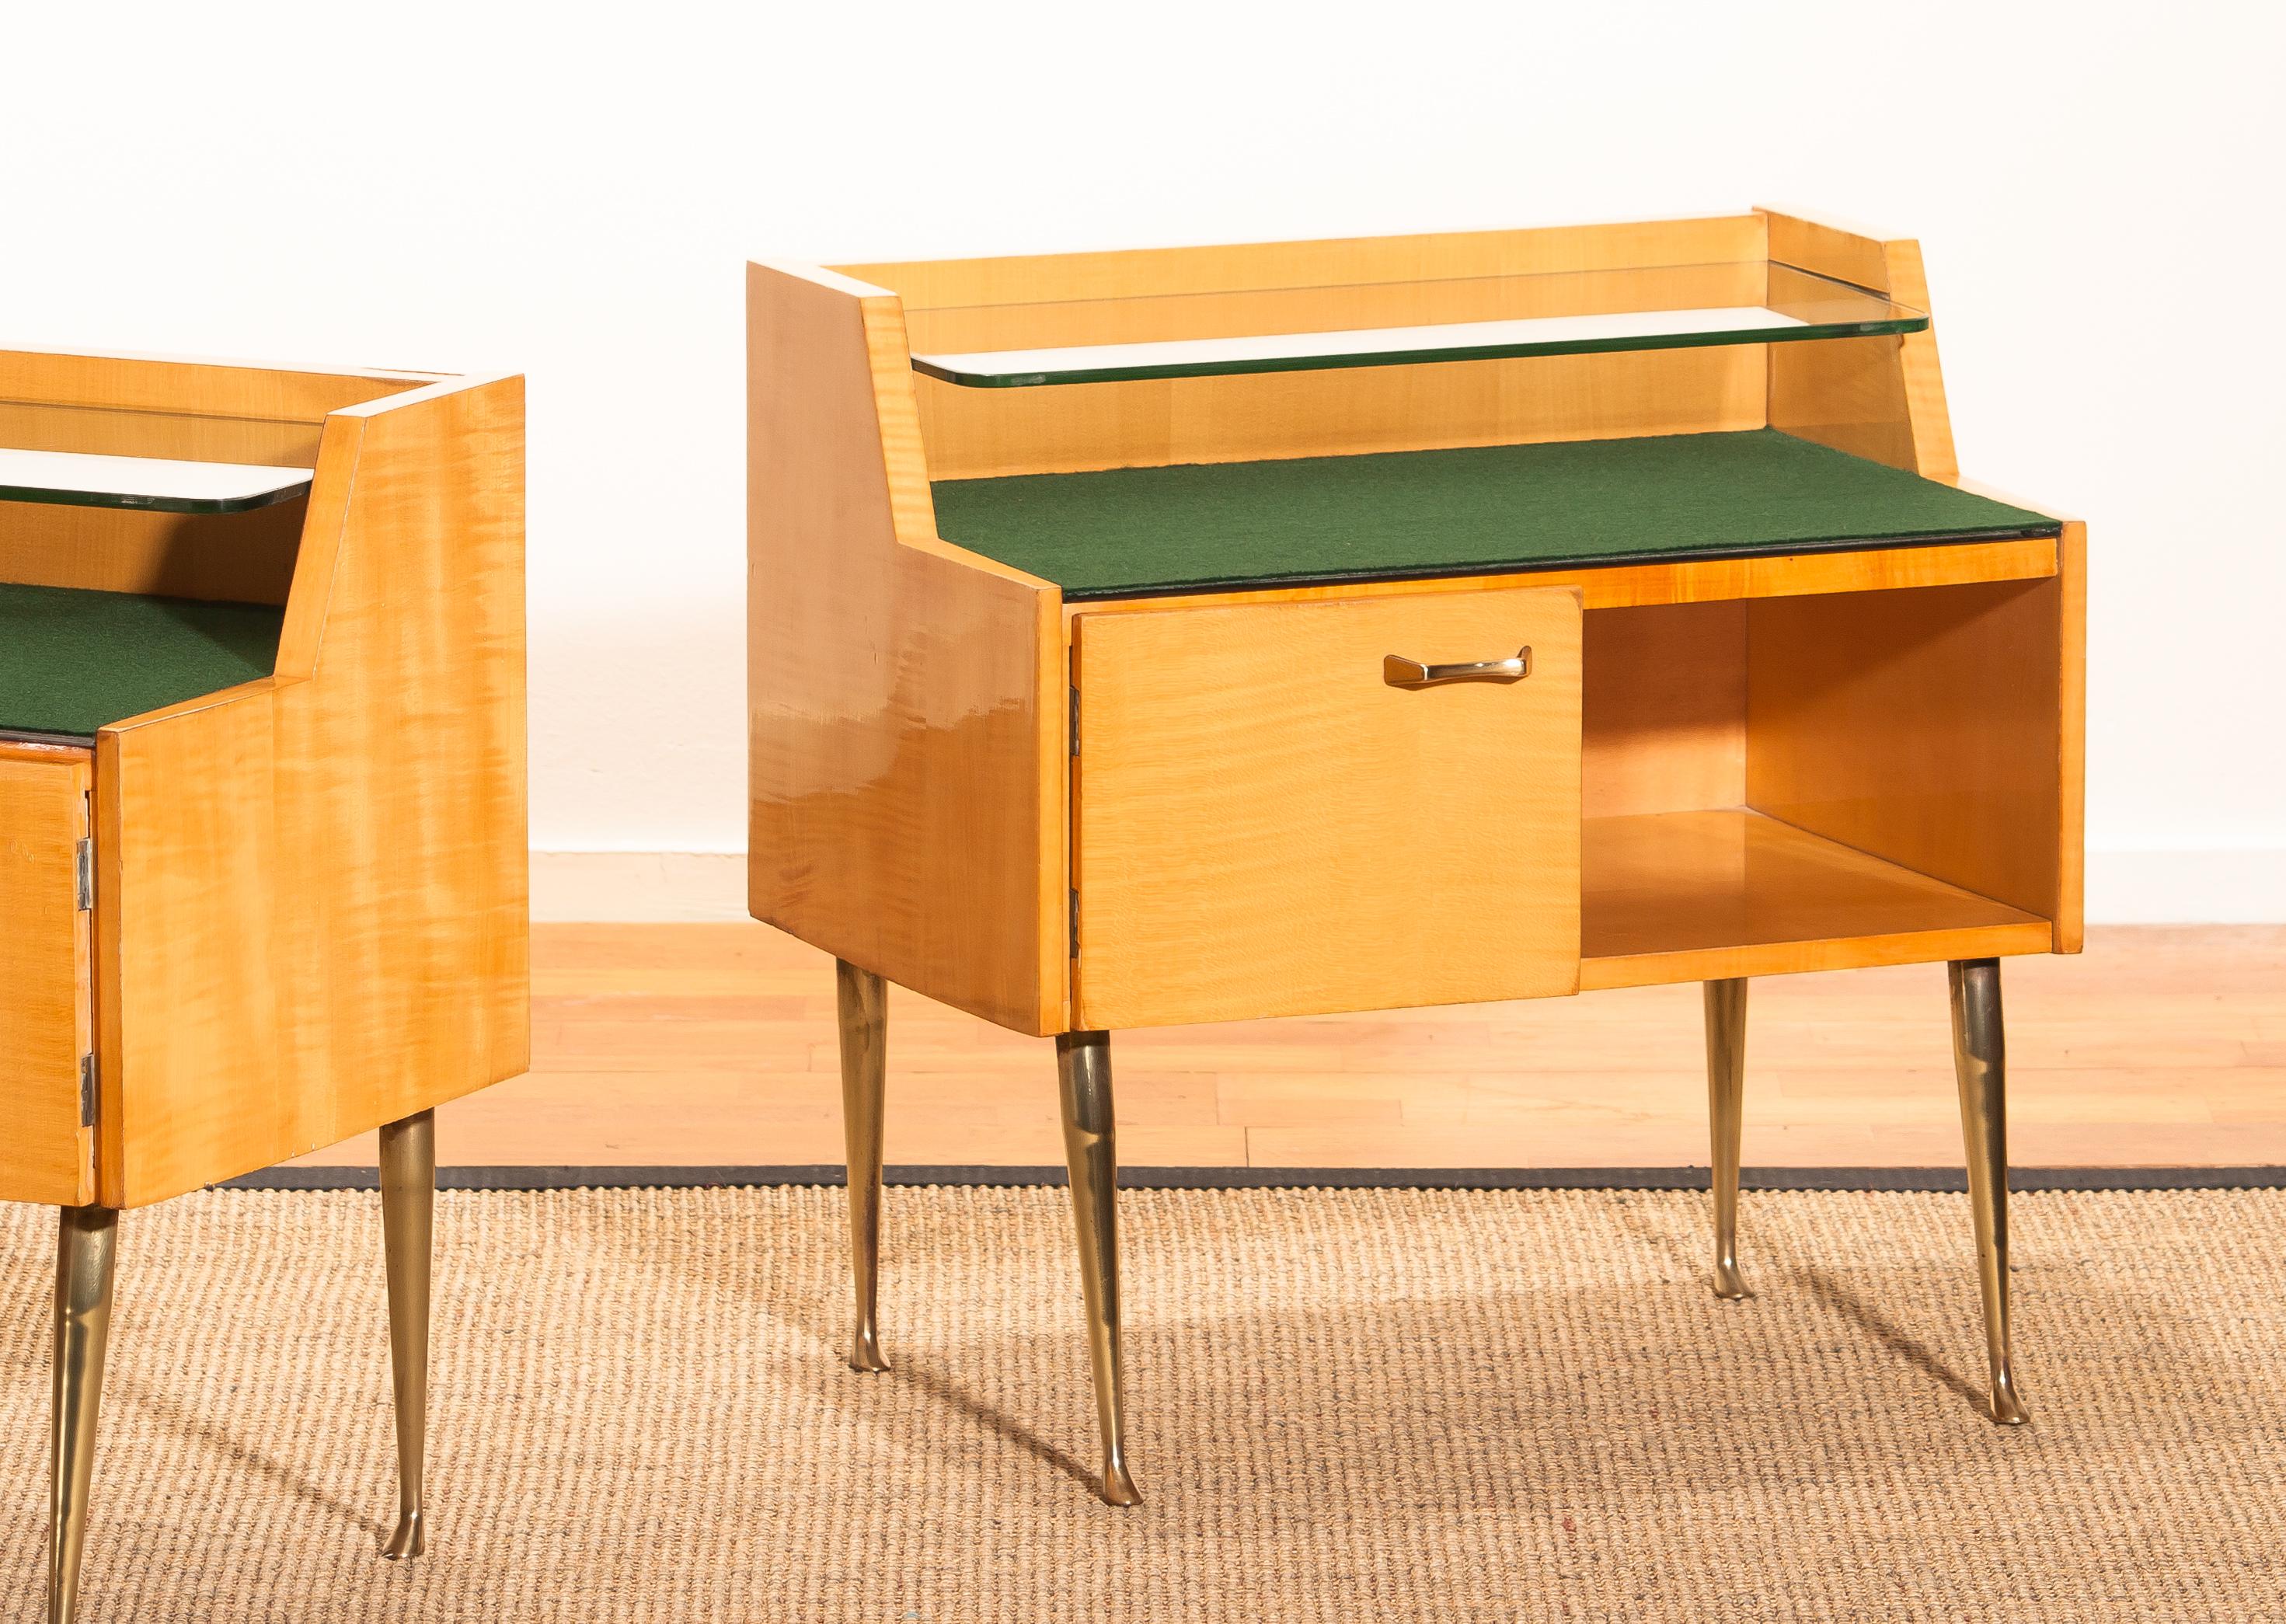 1950s, Italian Set of Two Nightstands in Maple with Brass Legs by Paolo Buffa In Good Condition In Silvolde, Gelderland